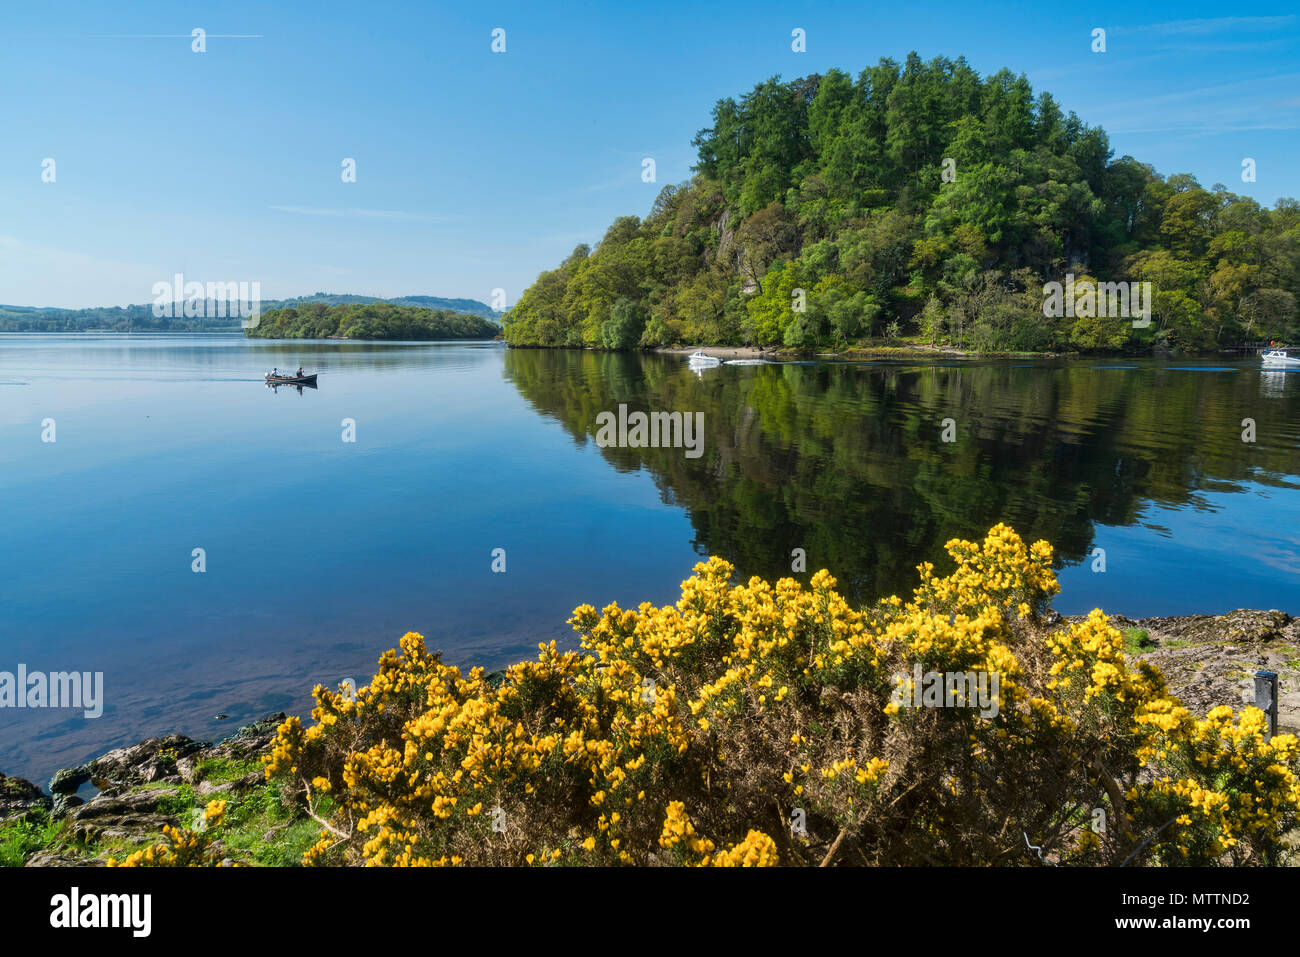 Loch lomond at Balmaha, looking to inchcailloch island, Stirlingshire, Scotland, UK Stock Photo